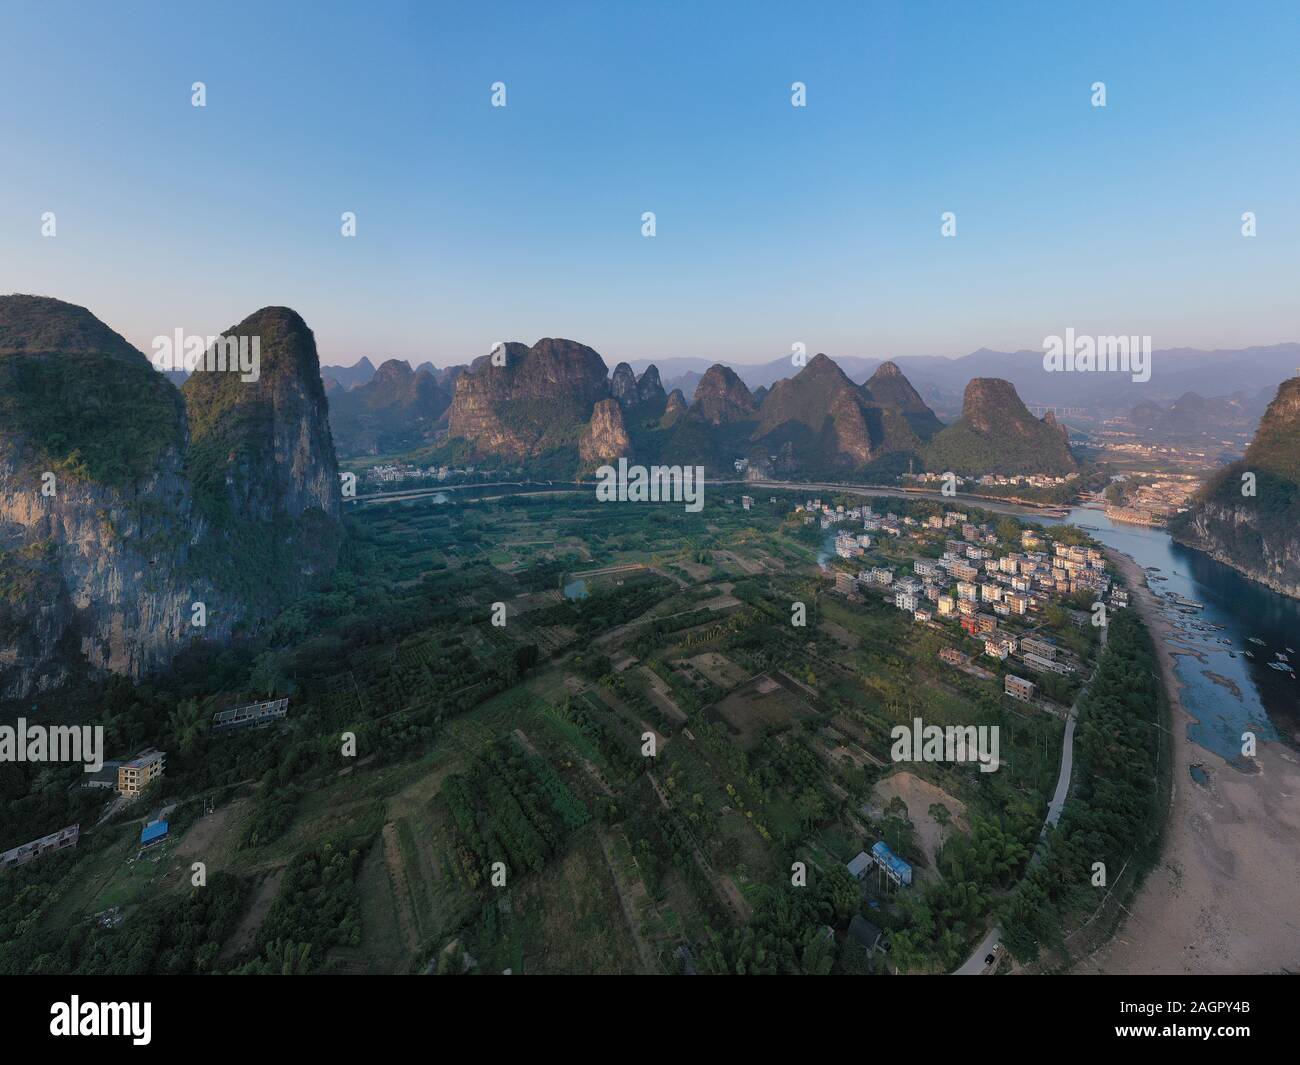 Sunrise over Xingping karsts hills in Xianggong hill and Li river at sunset near Yangshuo in Guanxi province, China Stock Photo